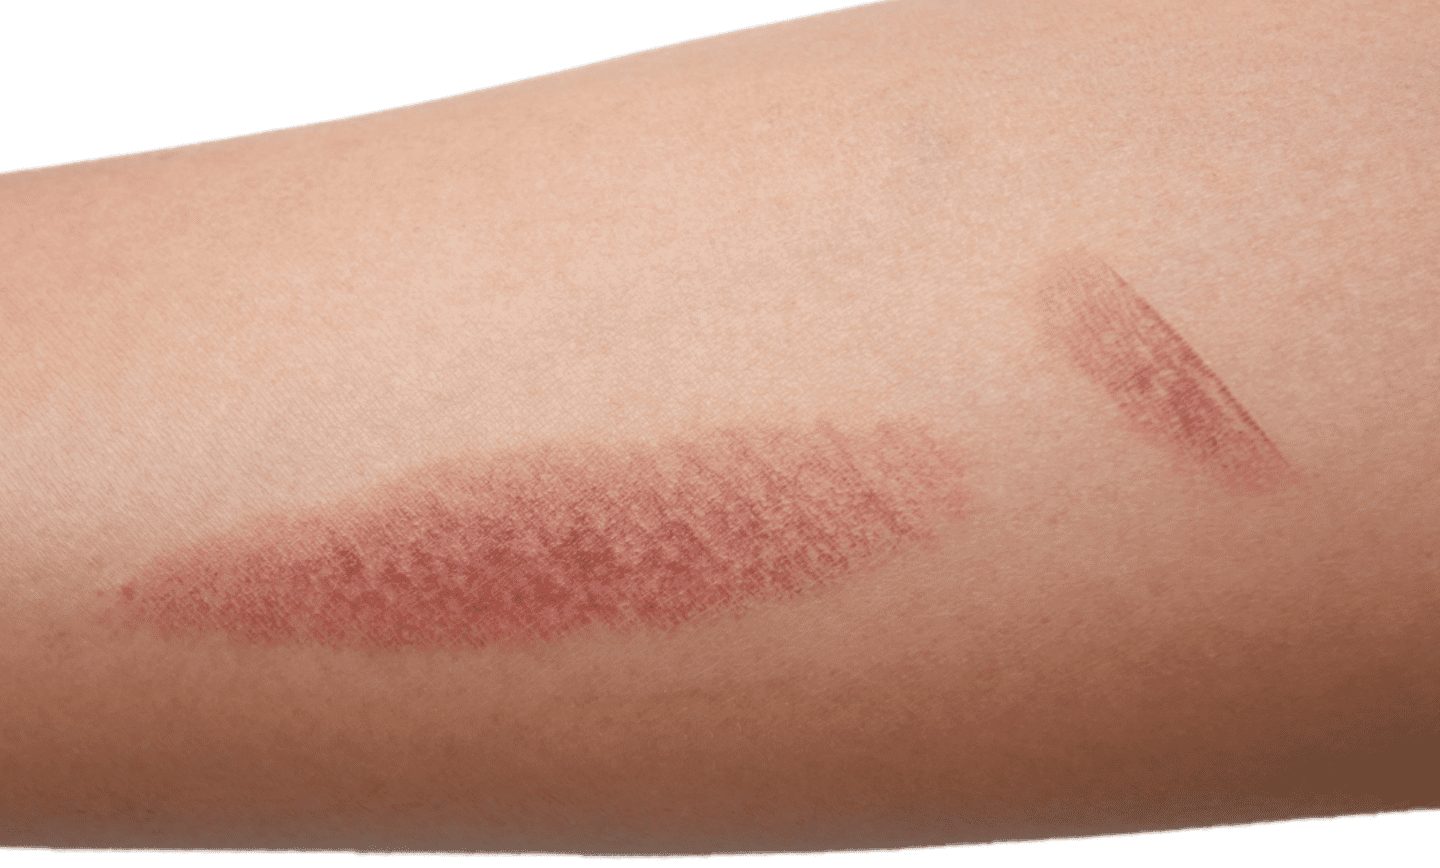 Are laser hair removal burns common?